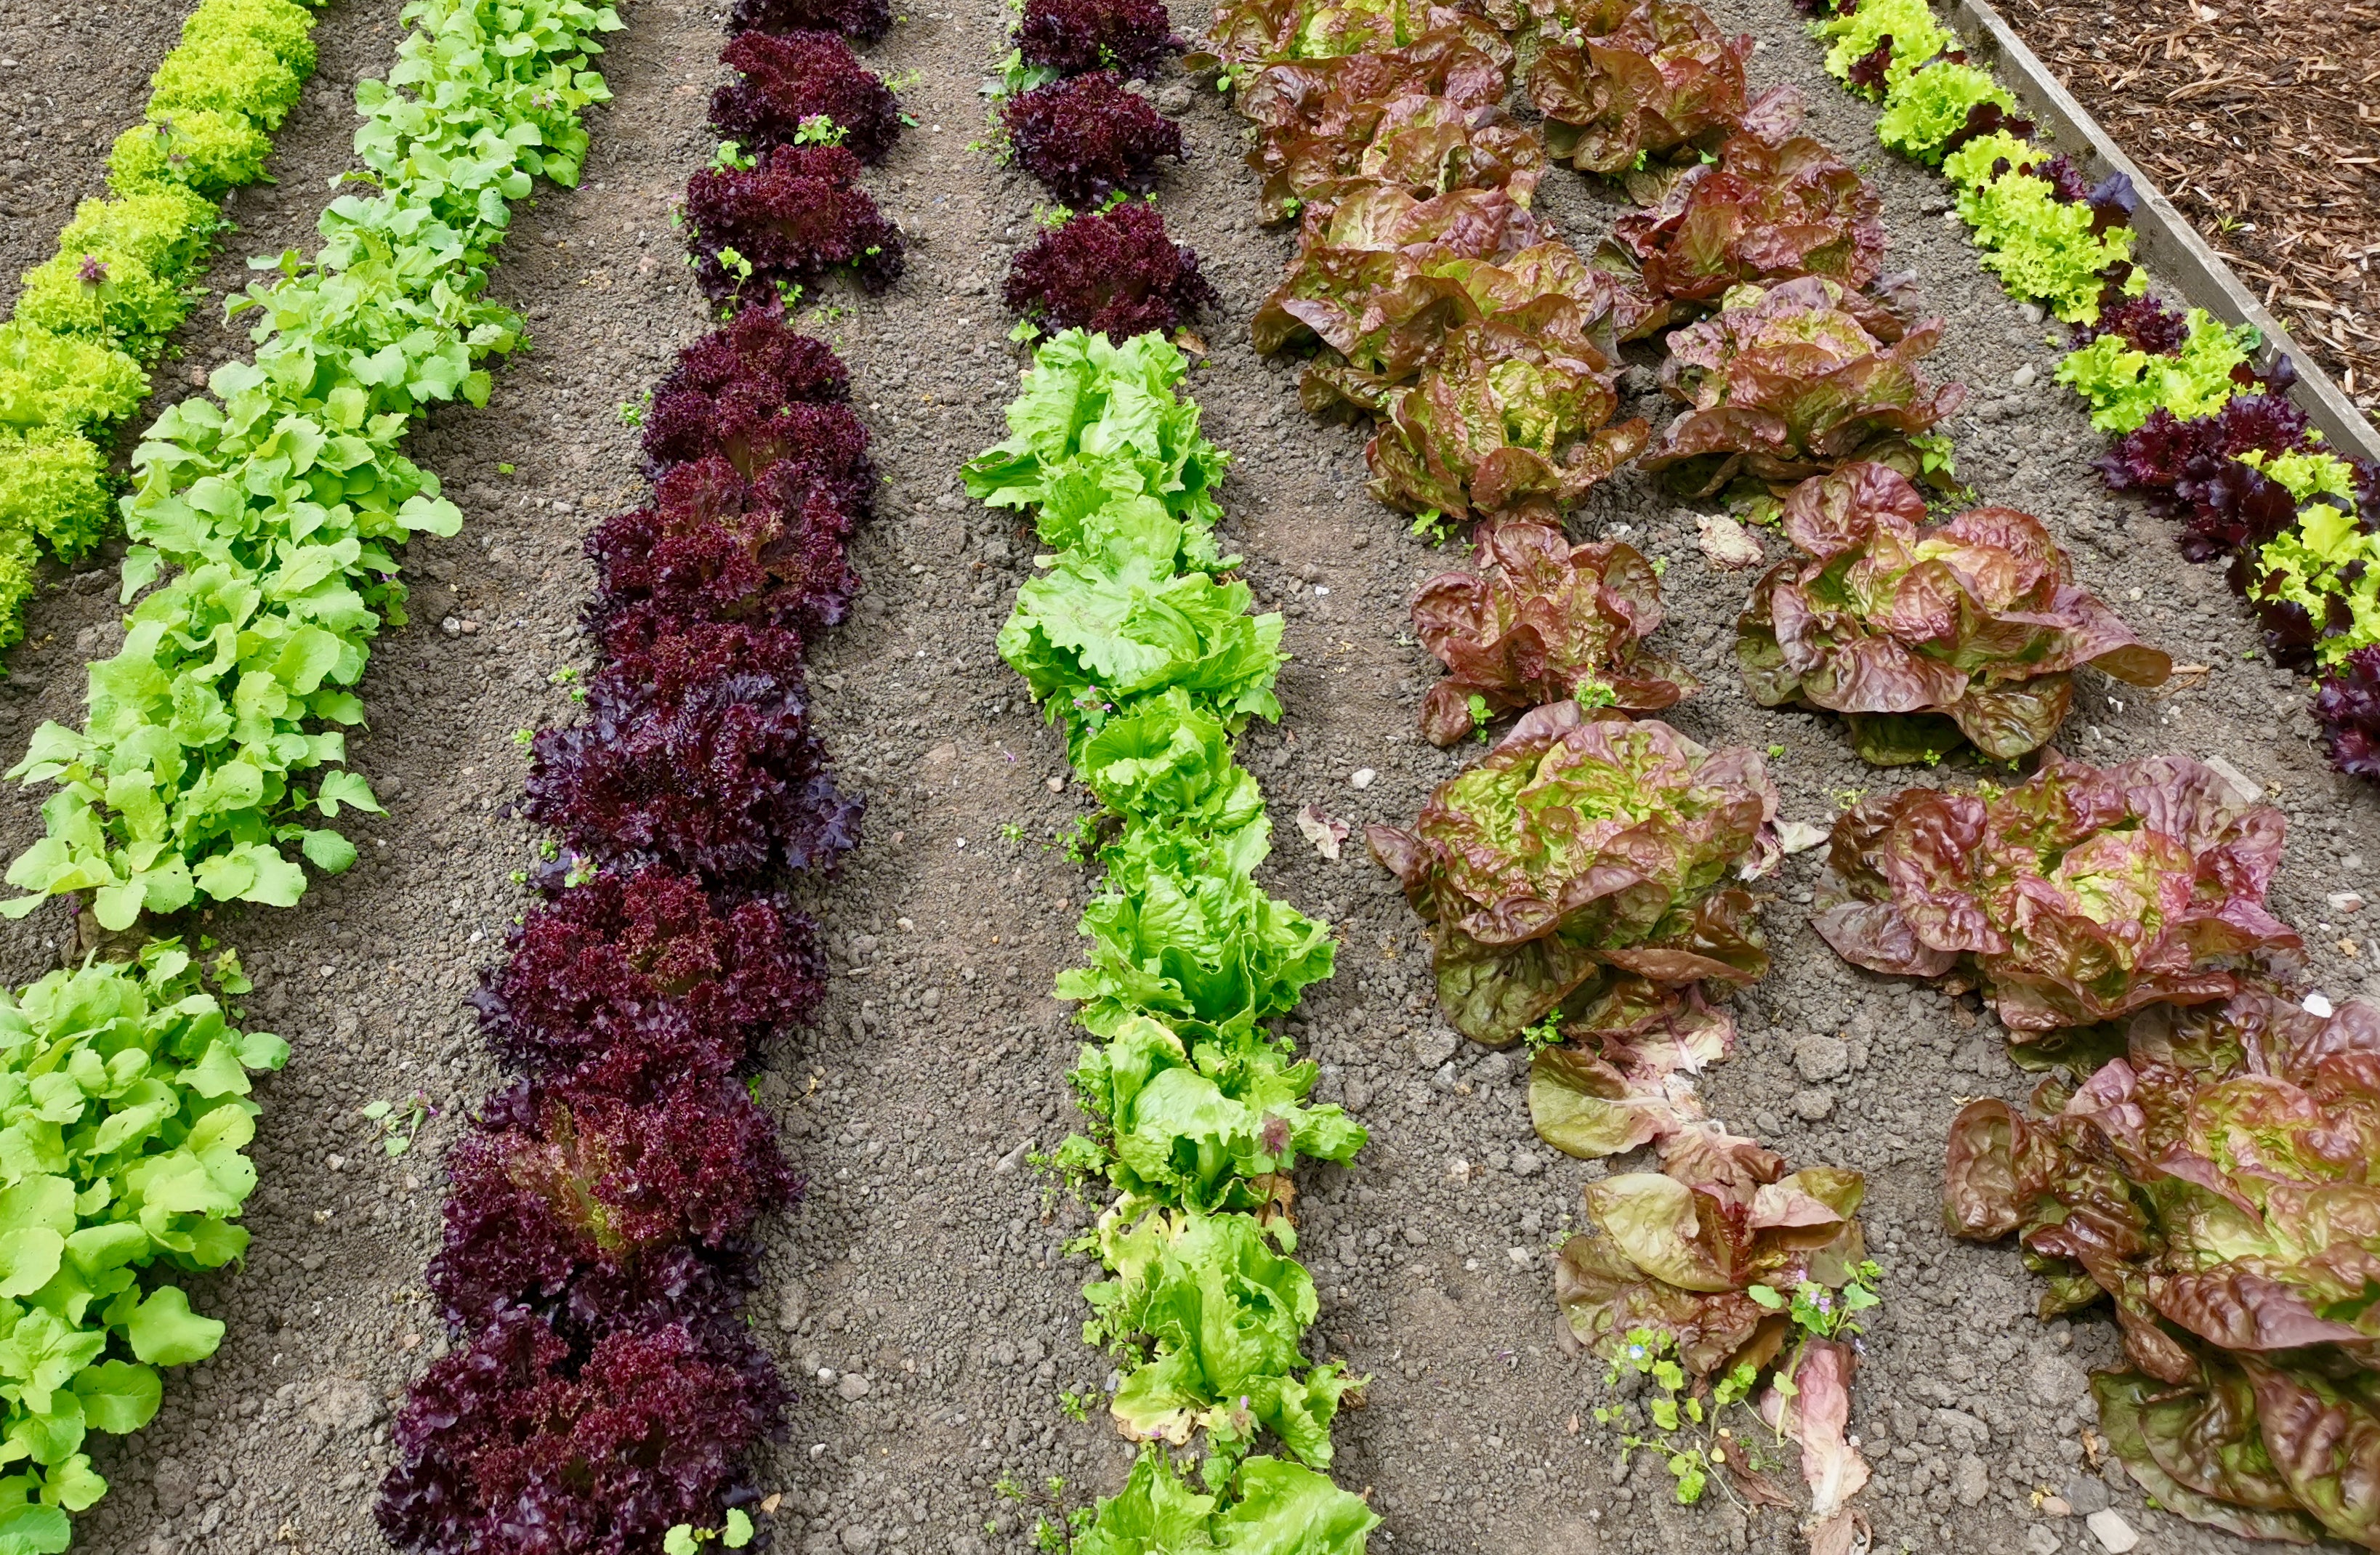 All lettuces are salad greens, but not all salad greens are lettuces